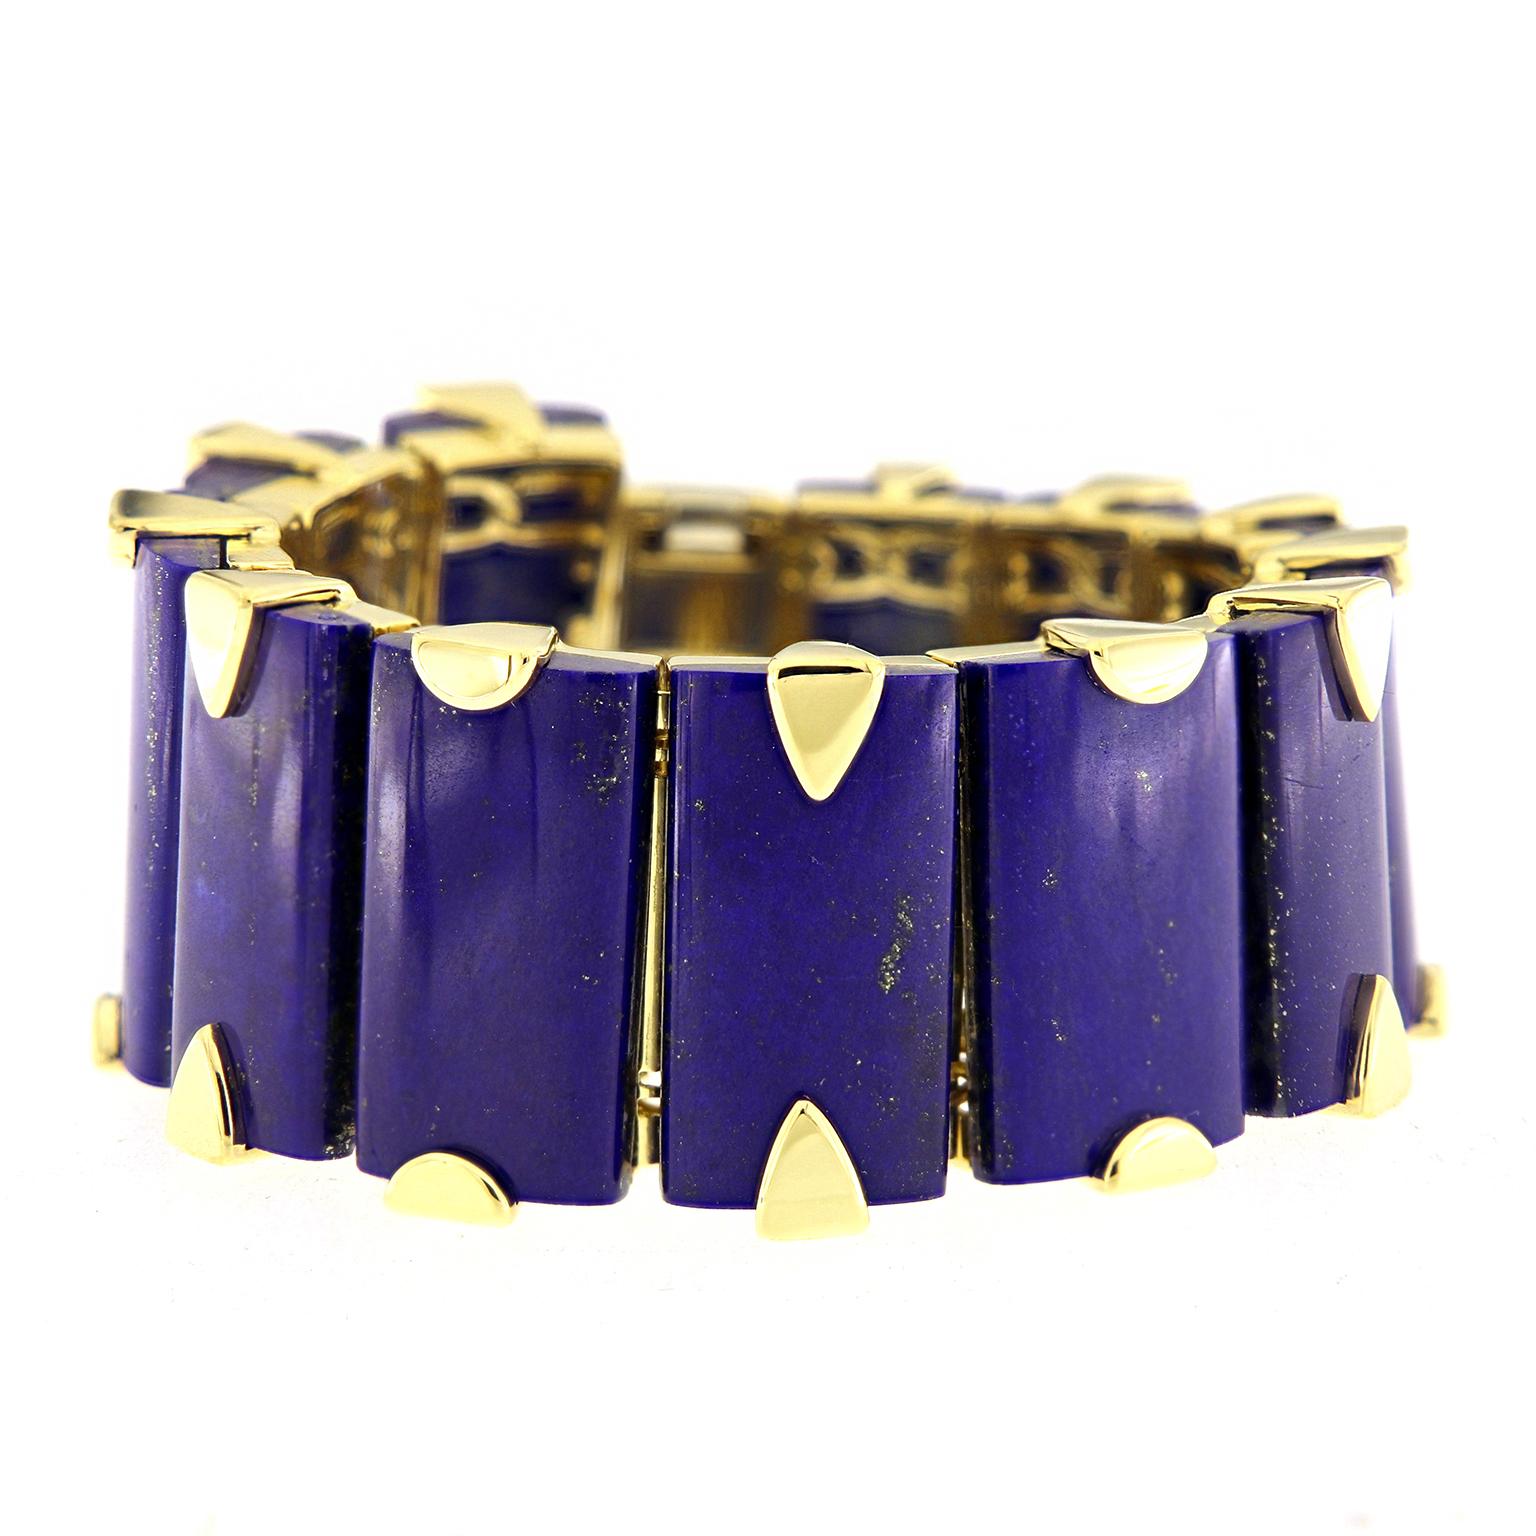 Valentin Magro 12 Tapering Rectangular Lapis Bracelet in 18 Karat Yellow Gold is blue and gold and lovely all over. Lapis lazuli rectangles sit in a row, forming a jeweled line. Prongs in 18k yellow gold hold the gems in place while serving as a